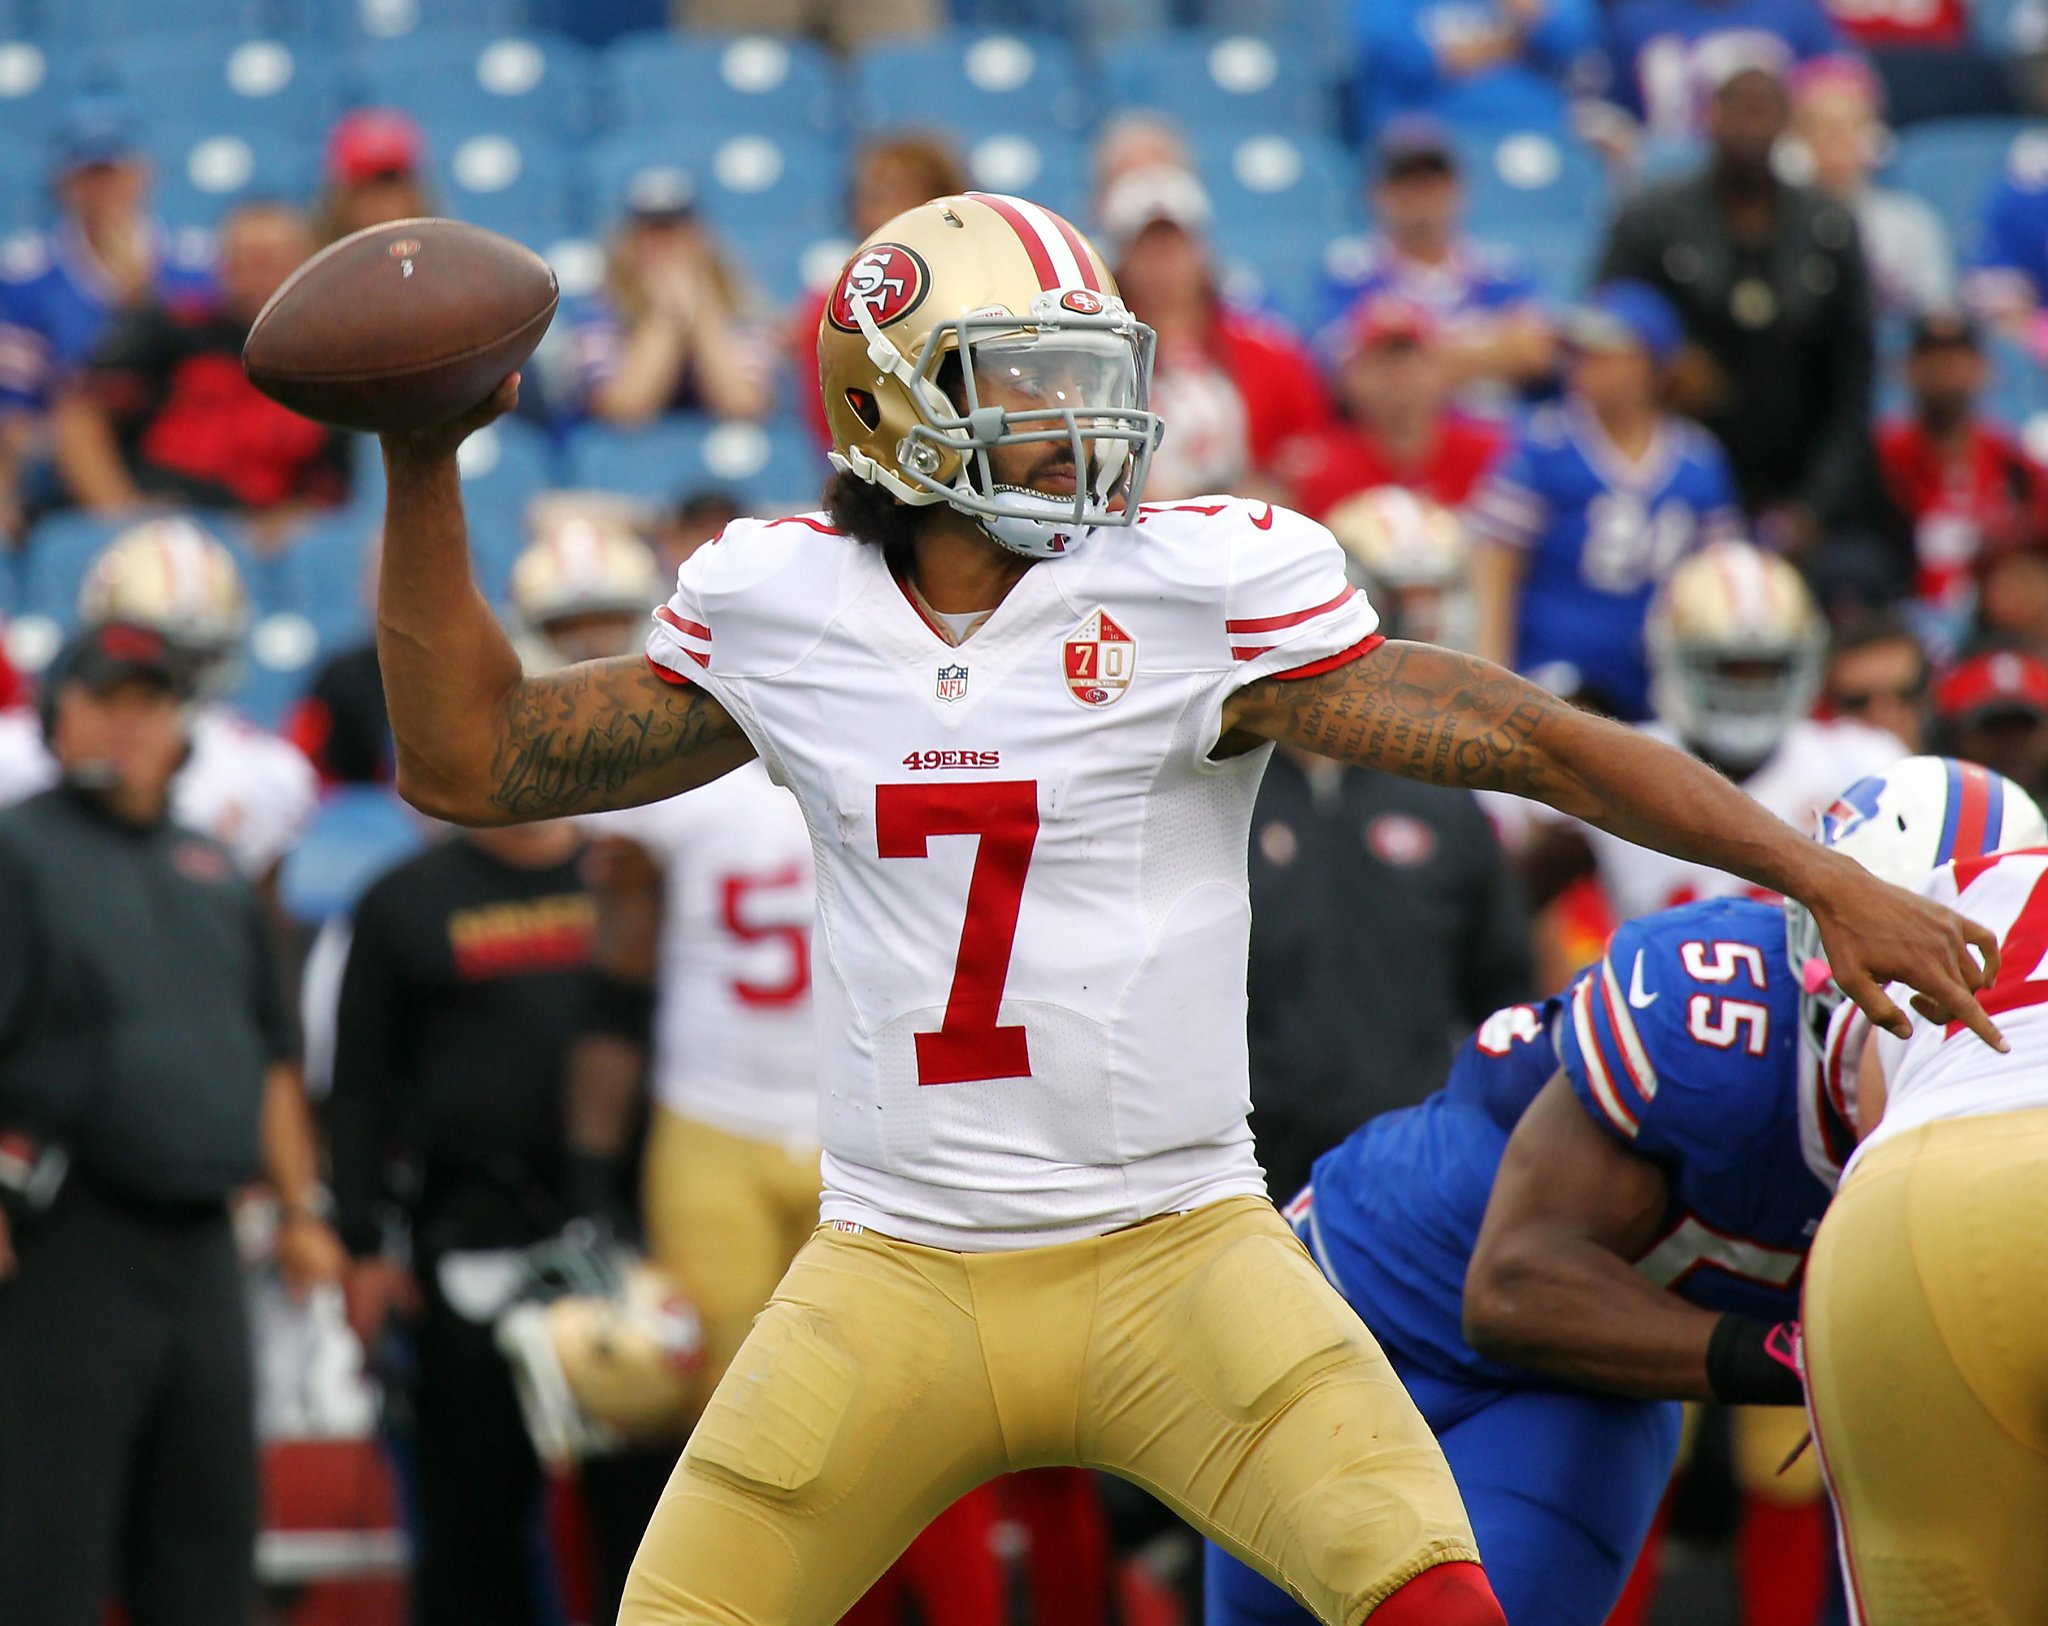 I Wore a Colin Kaepernick Jersey to an NFL Game - Sports Illustrated